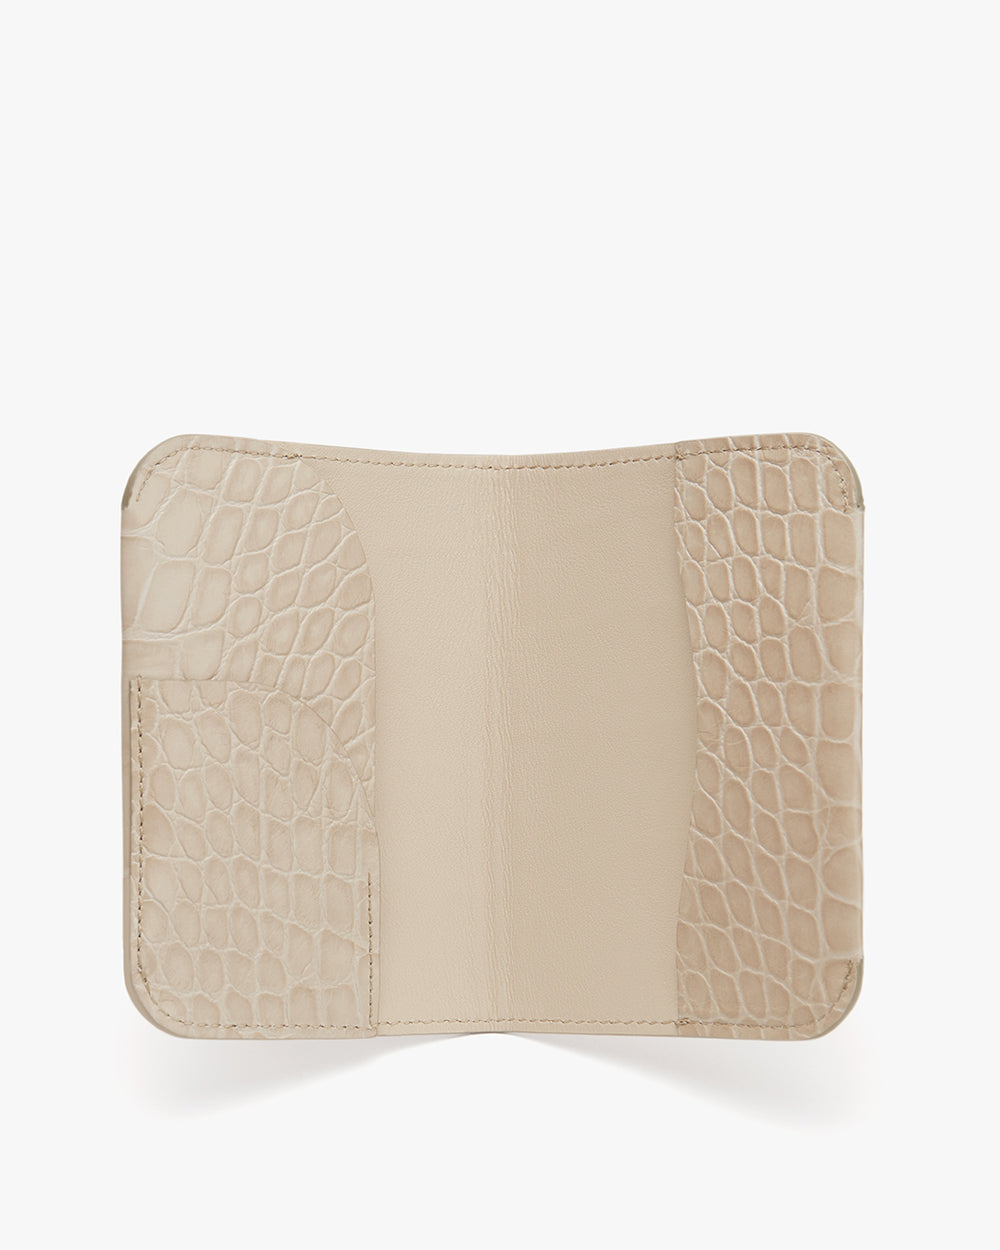 Wallet with textured and smooth sections, open view.